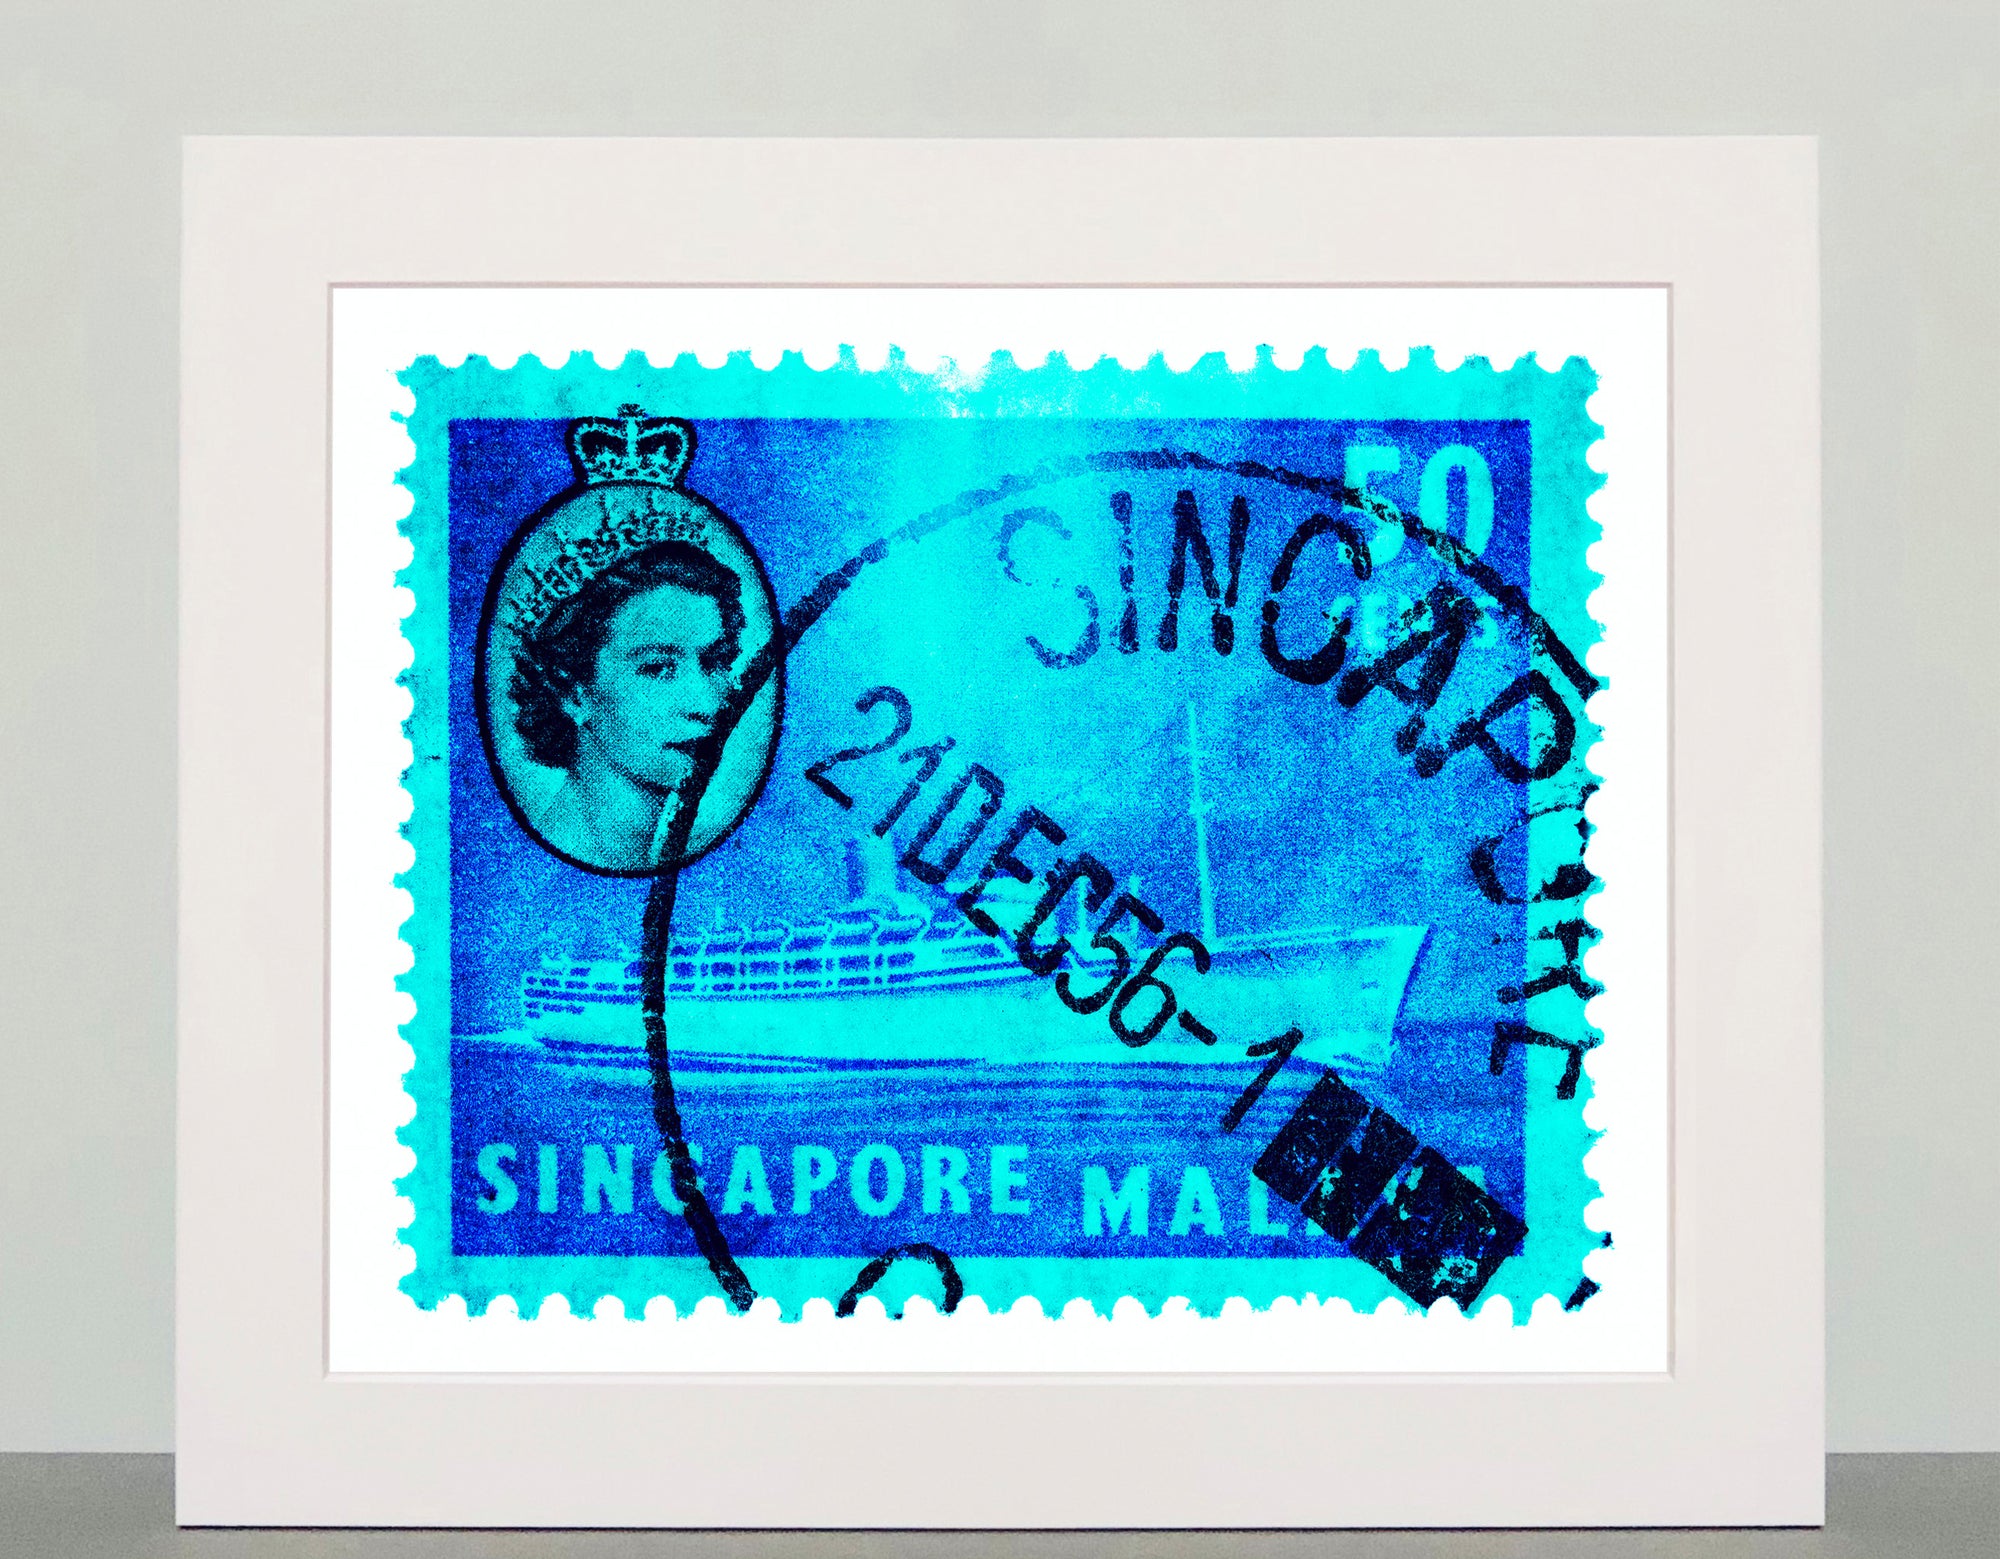 Singapore Stamp Collection '50 cents QEII Steamer Ship' (Cyan). These historic postage stamps that make up the Heidler & Heeps Stamp Collection, Singapore Series “Postcards from Afar” have been given a twenty-first century pop art lease of life. The fine detailed tapestry of the original small postage stamp has been brought to life, made unique by the franking stamp and Heidler & Heeps specialist darkroom process.